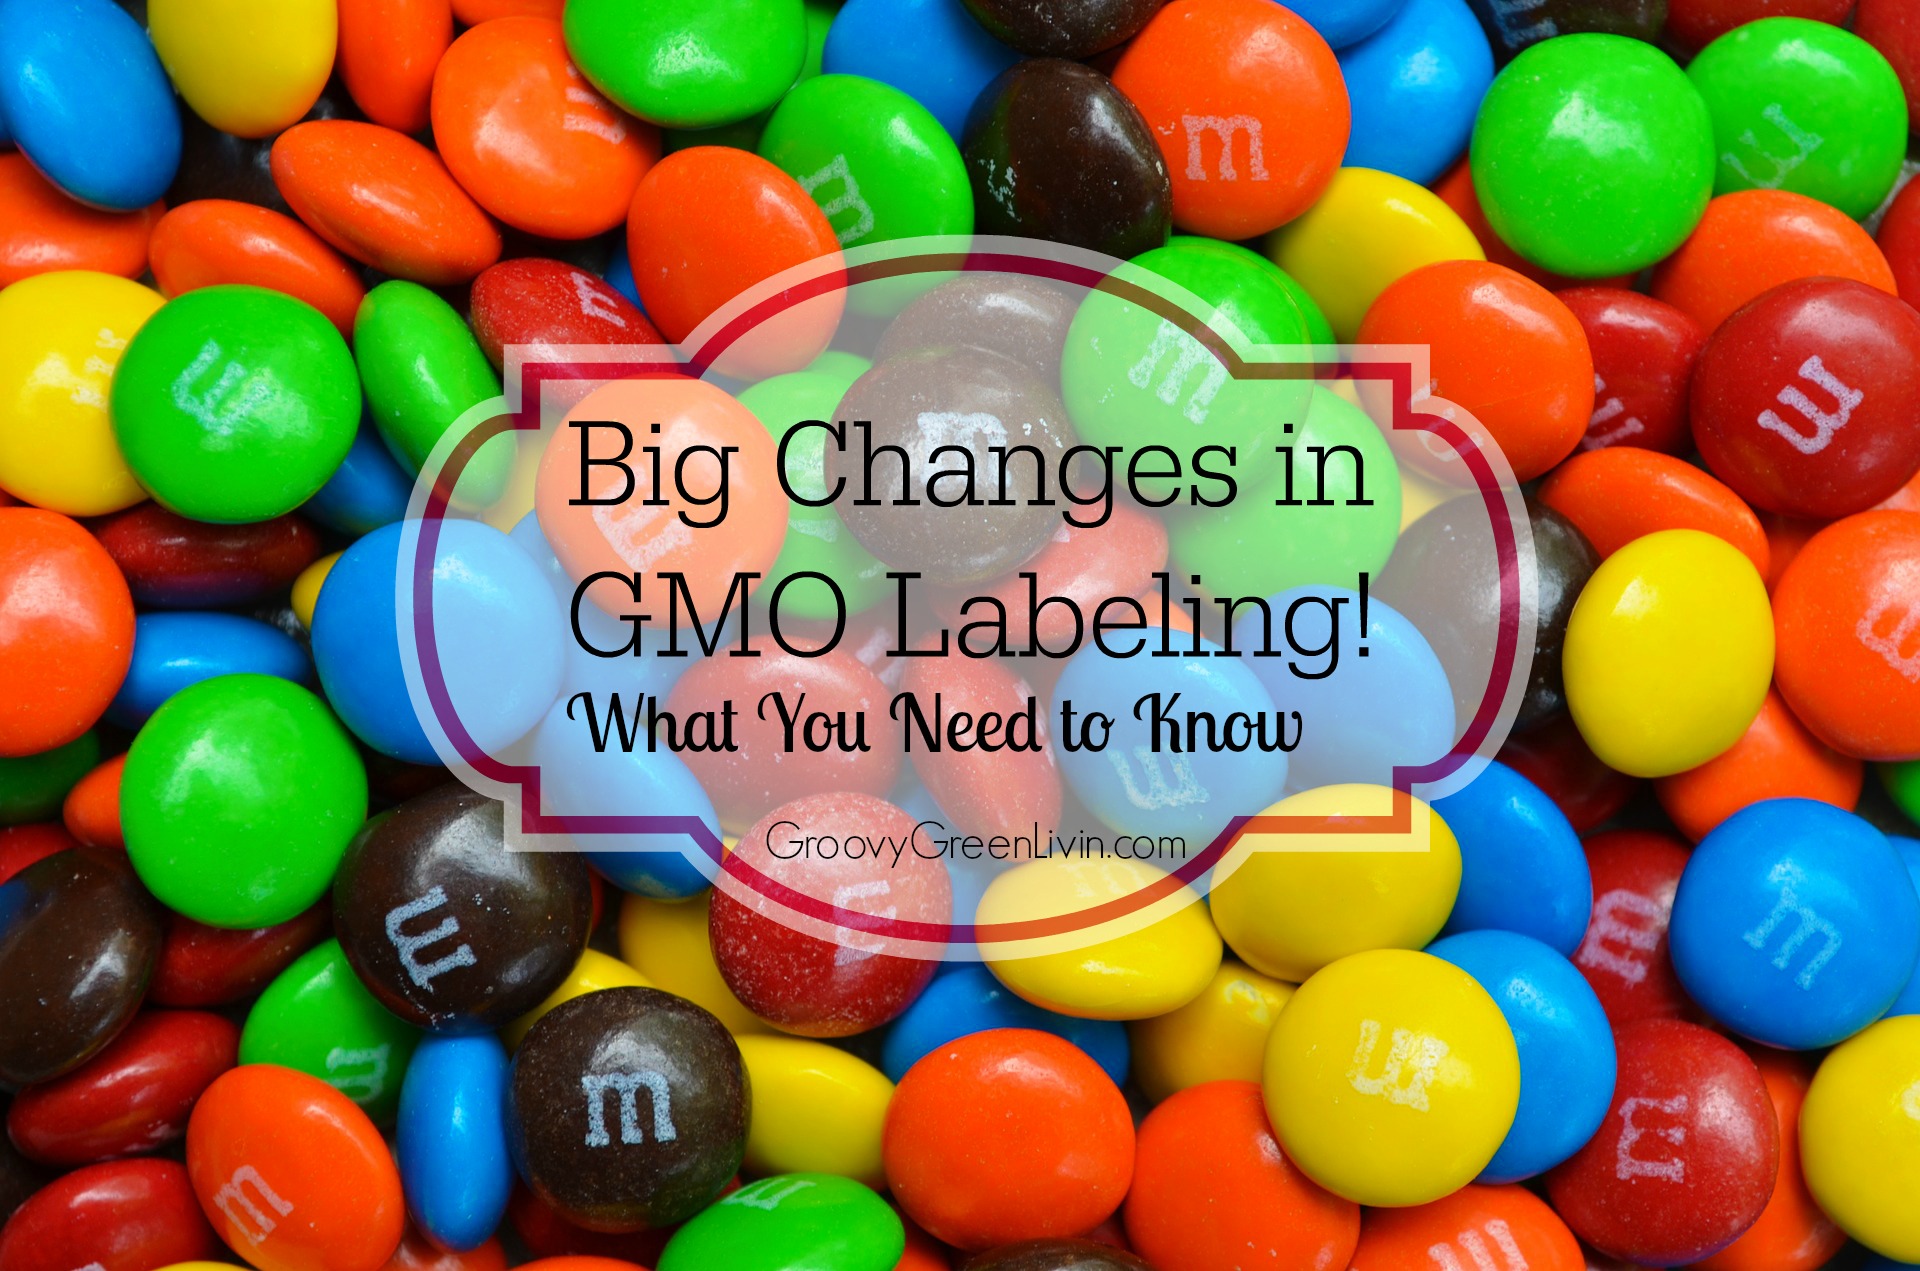 Big Changes in GMO Labeling! What You Need to Know